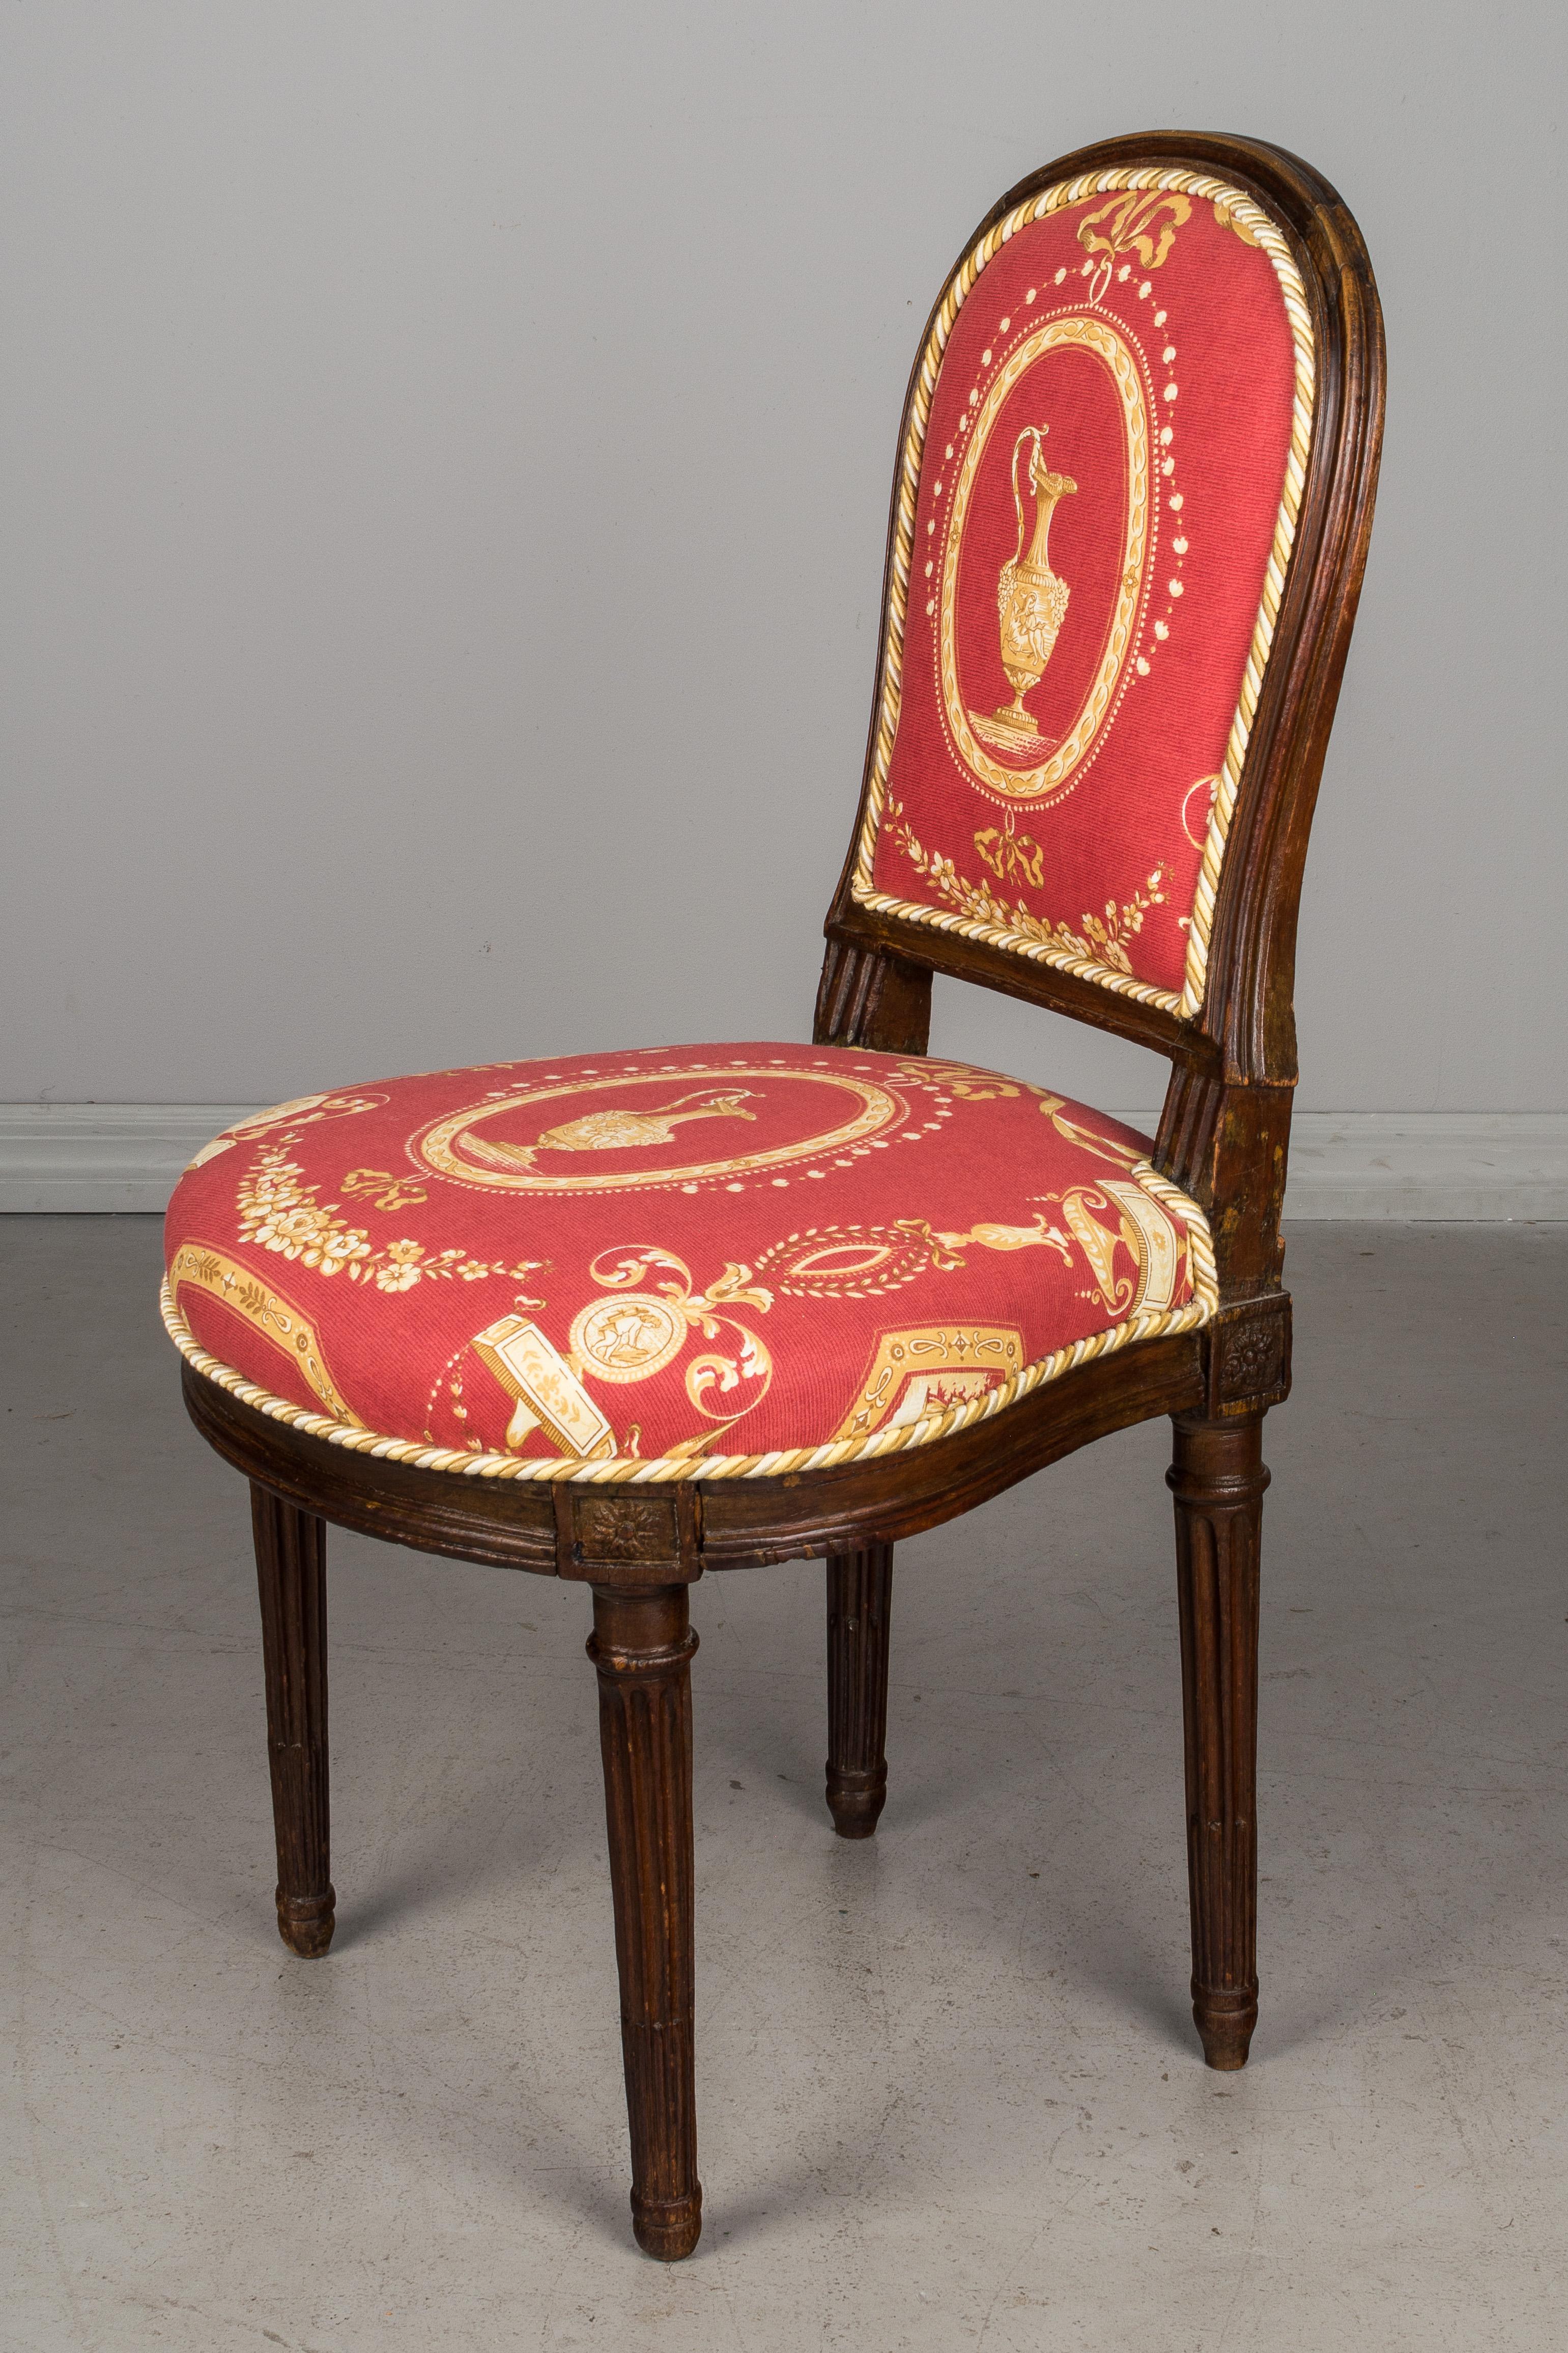 A 19th c. French Louis XVI style small parlor chair made of beechwood with carved details. Upholstered in a Fine decorator fabric with a custom cotton canvas slipcover. This petite side chair is a nice accent piece for a foyer and is sturdy for